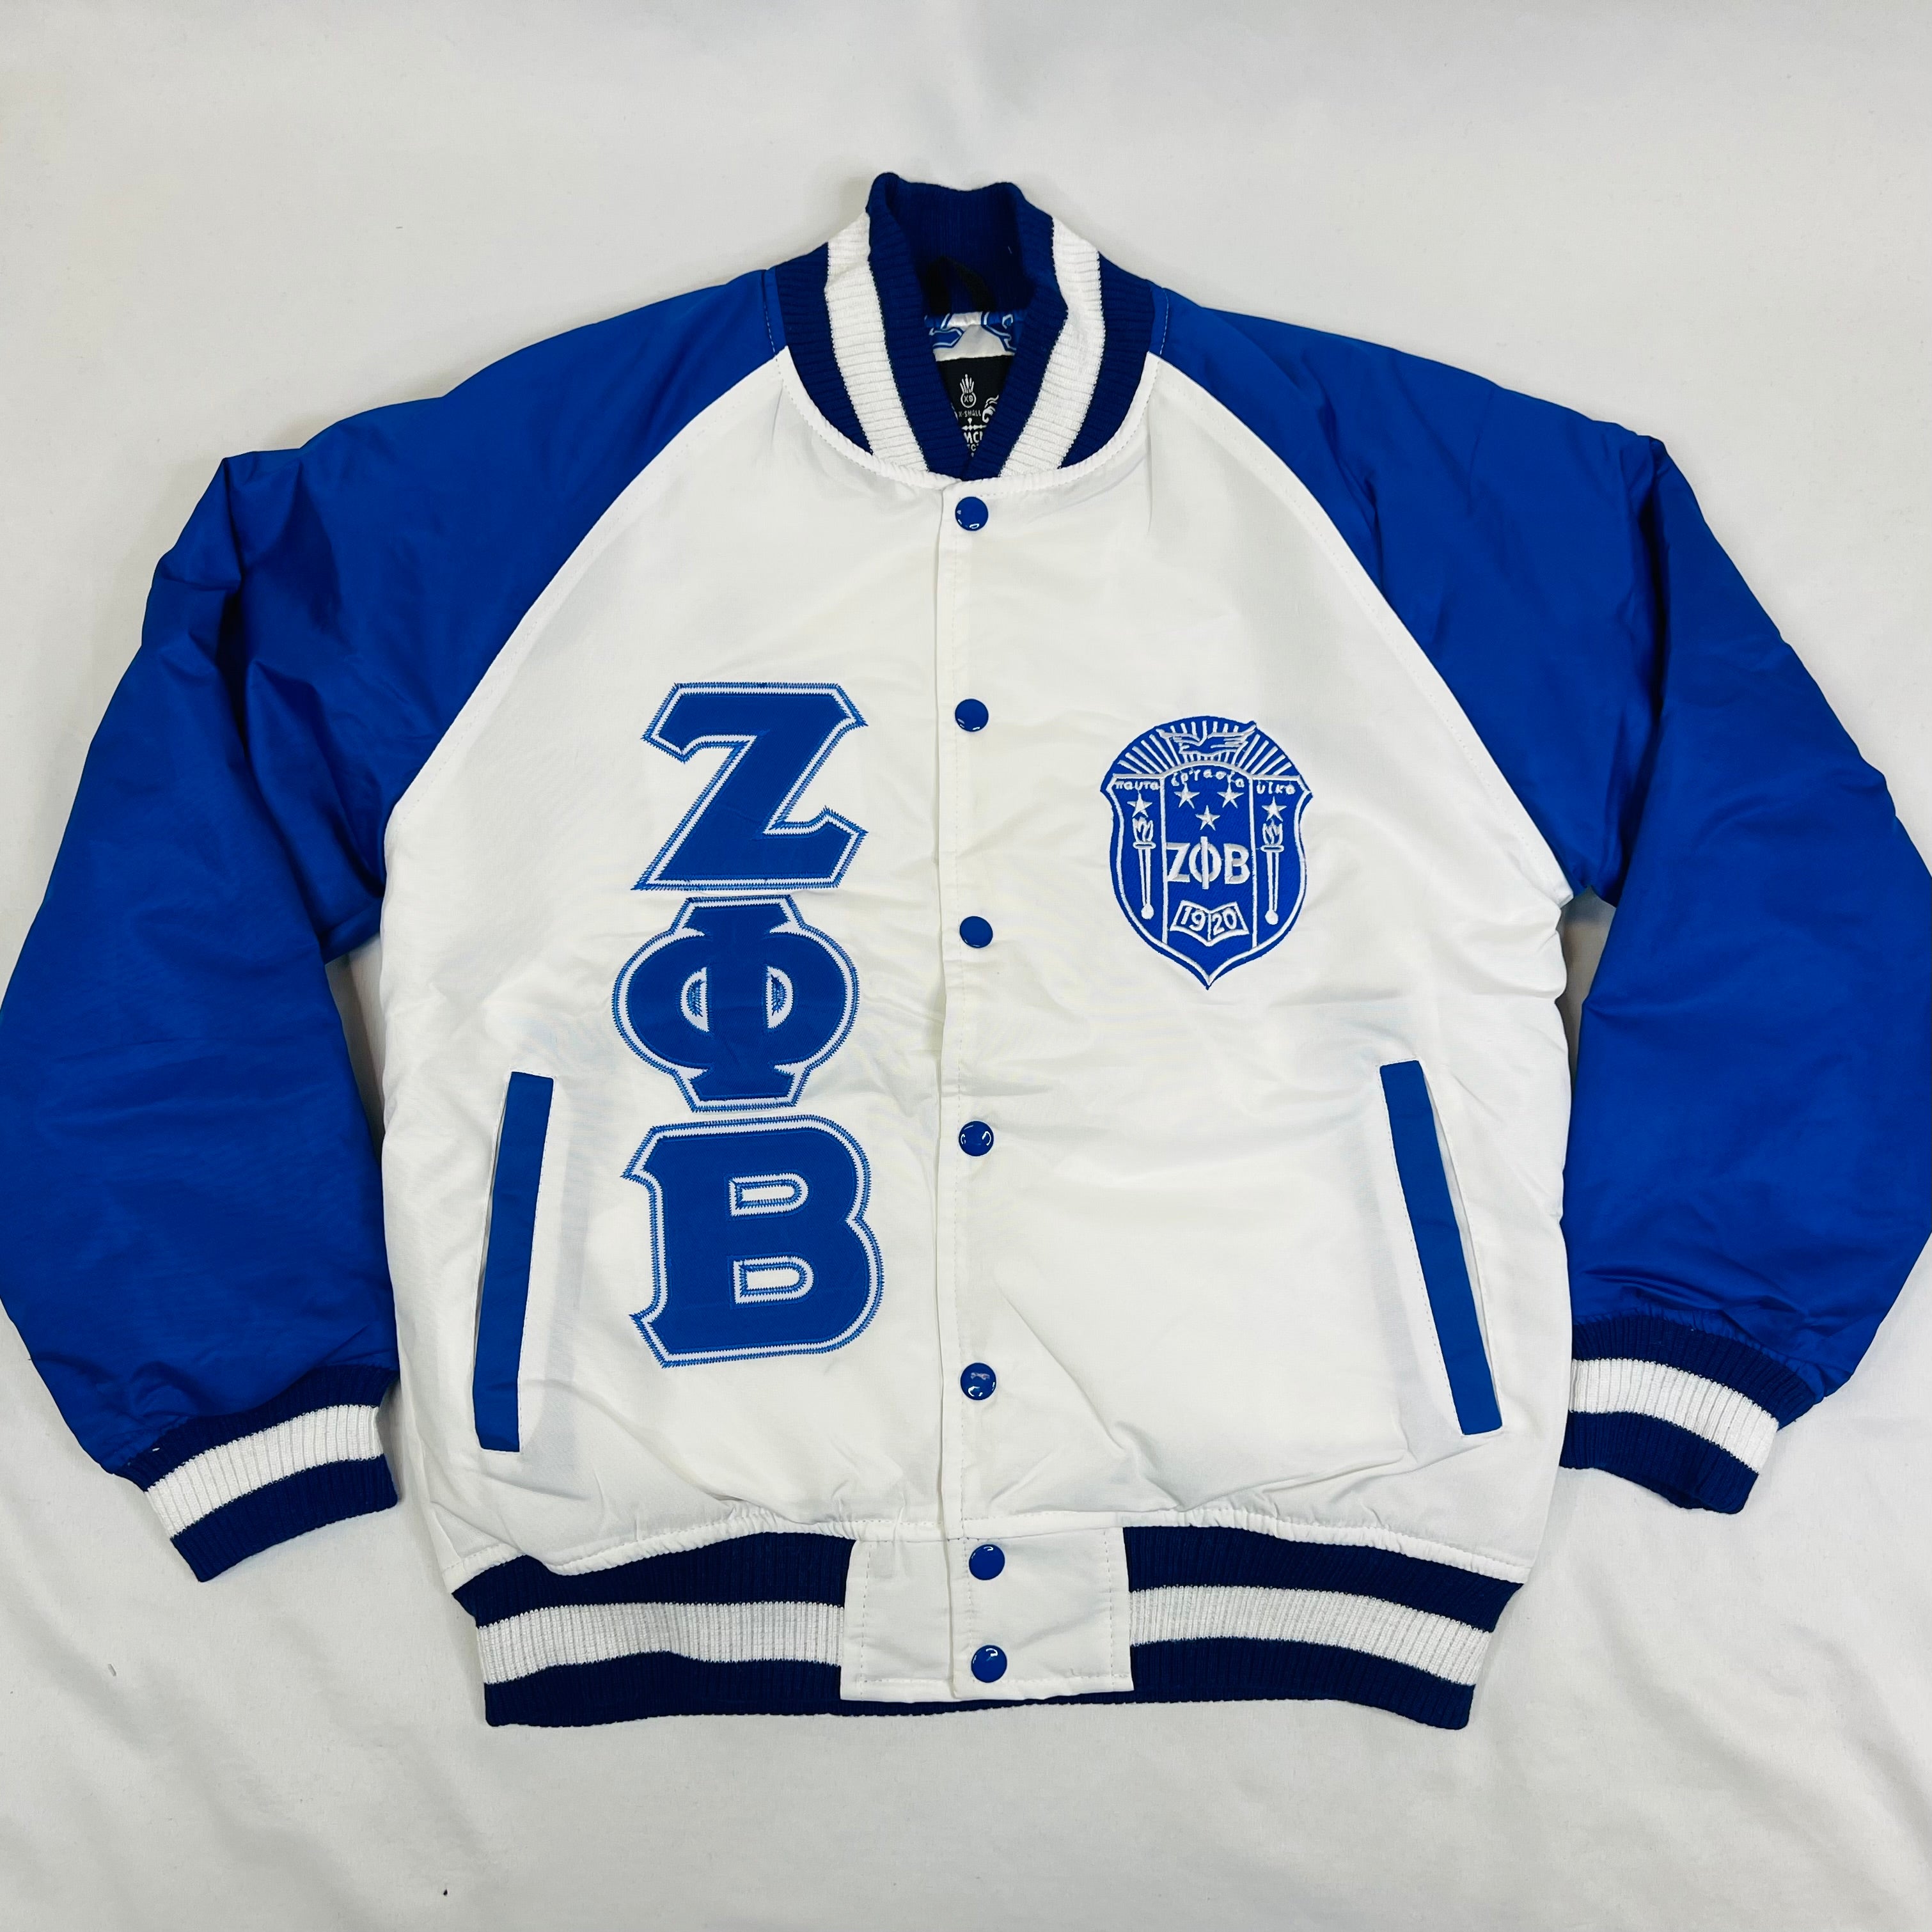 Zeta Bomber Jacket Custom Lining – The King McNeal Collection